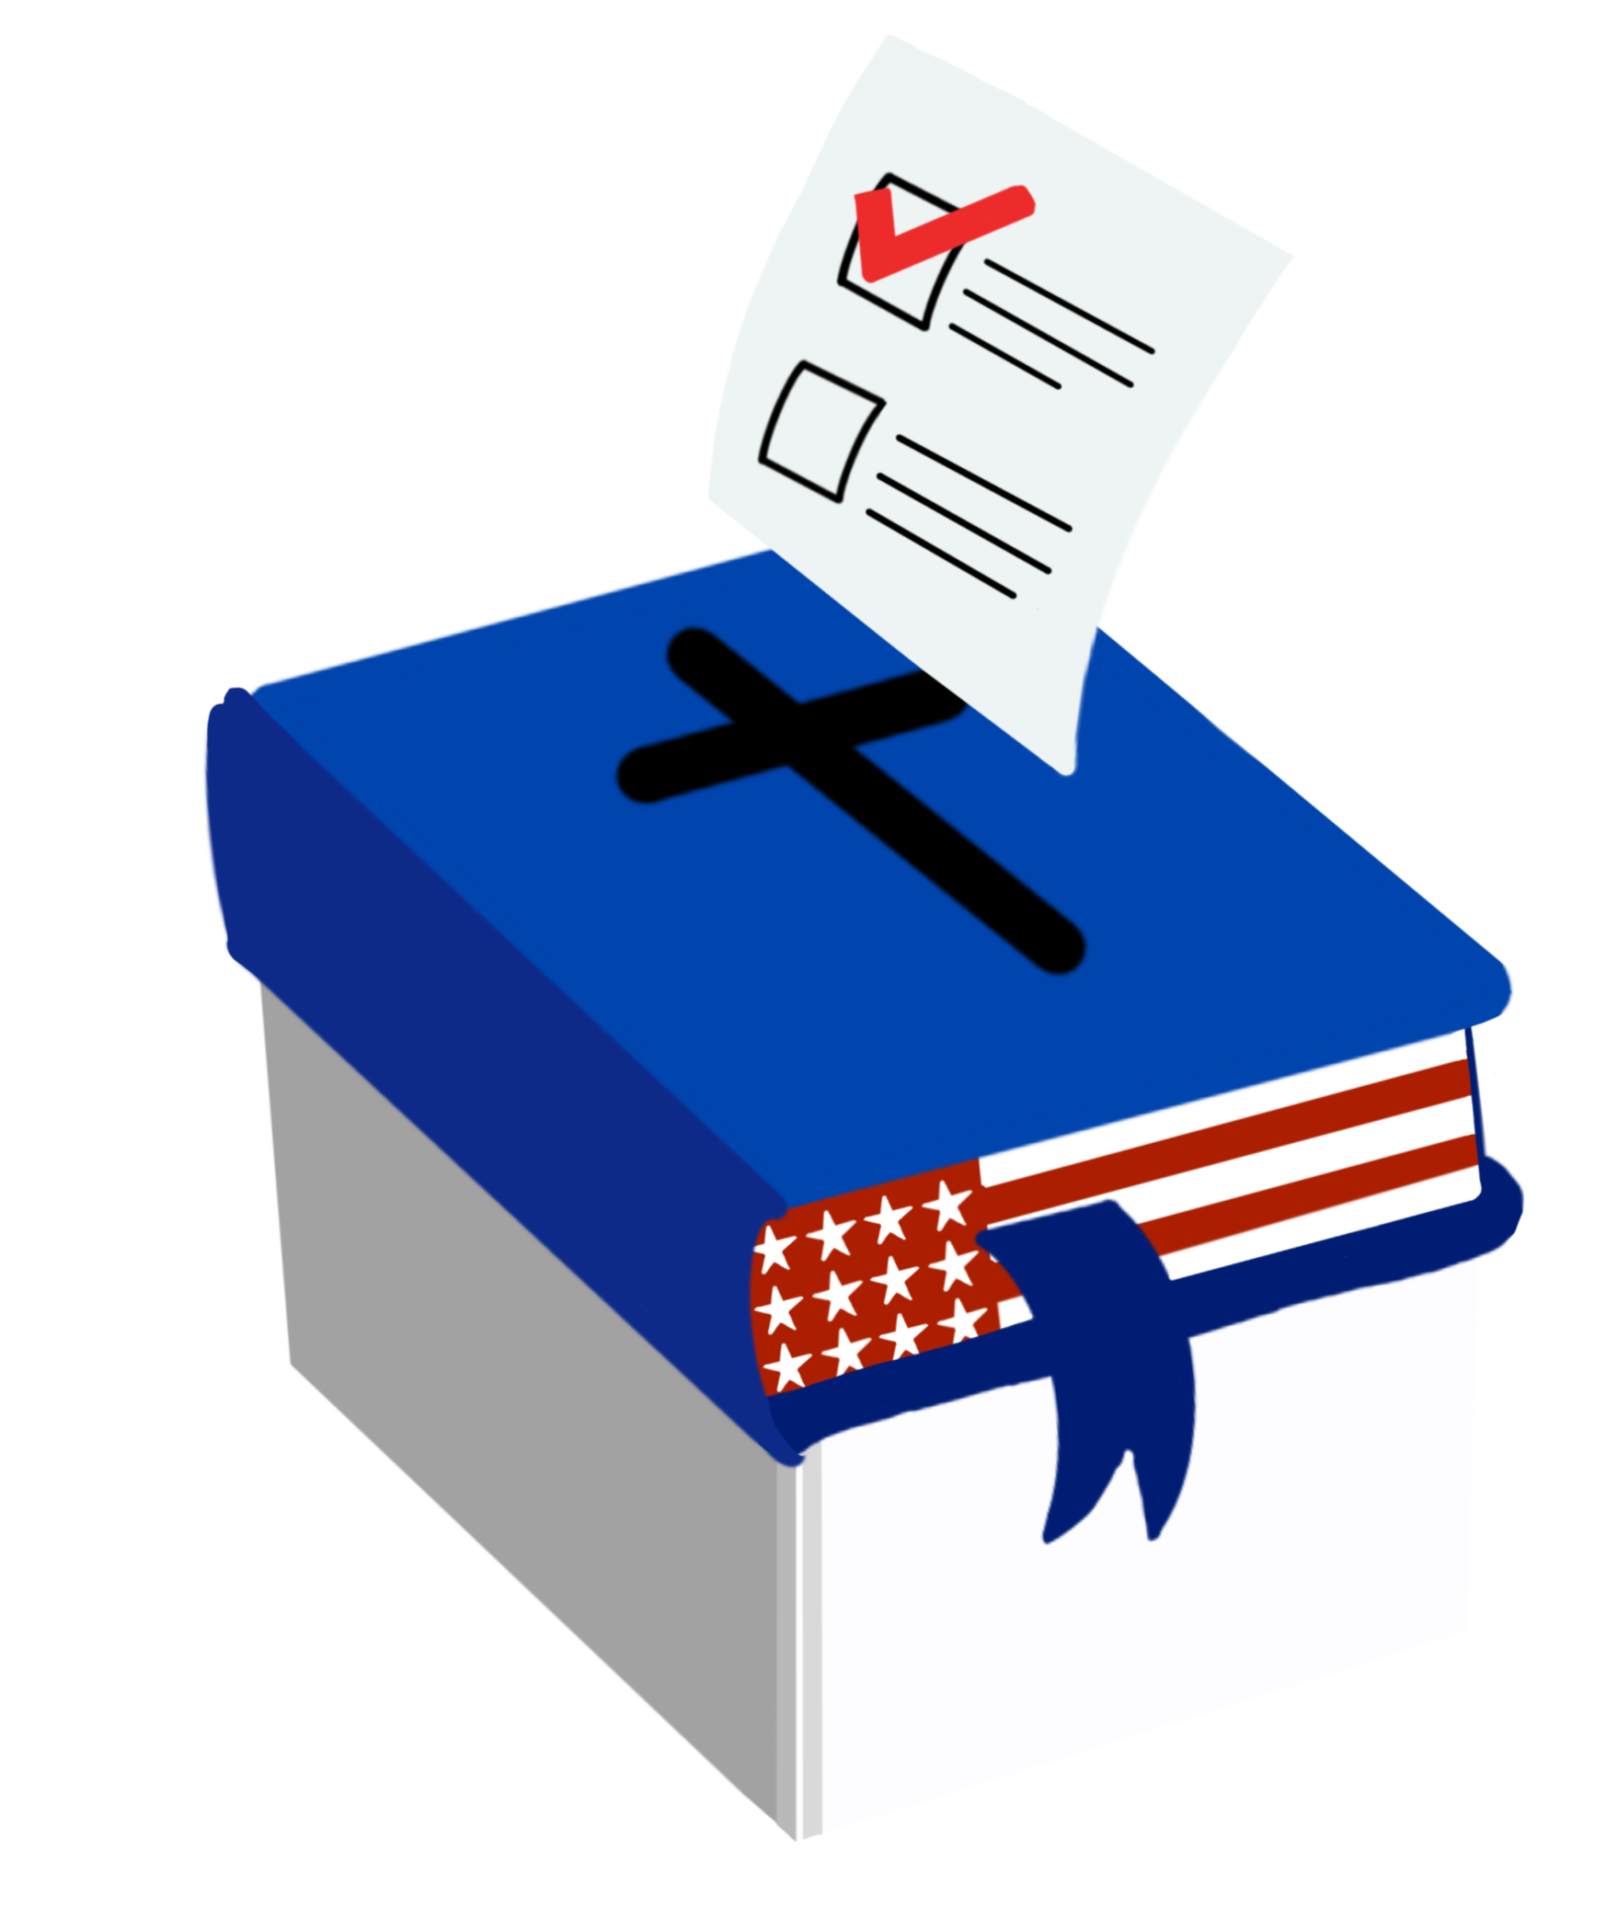 illustration of a closed blue bible with an American flag print over the pages. A ballot goes into the black cross on the cover of the bible, mimicking a ballot box.